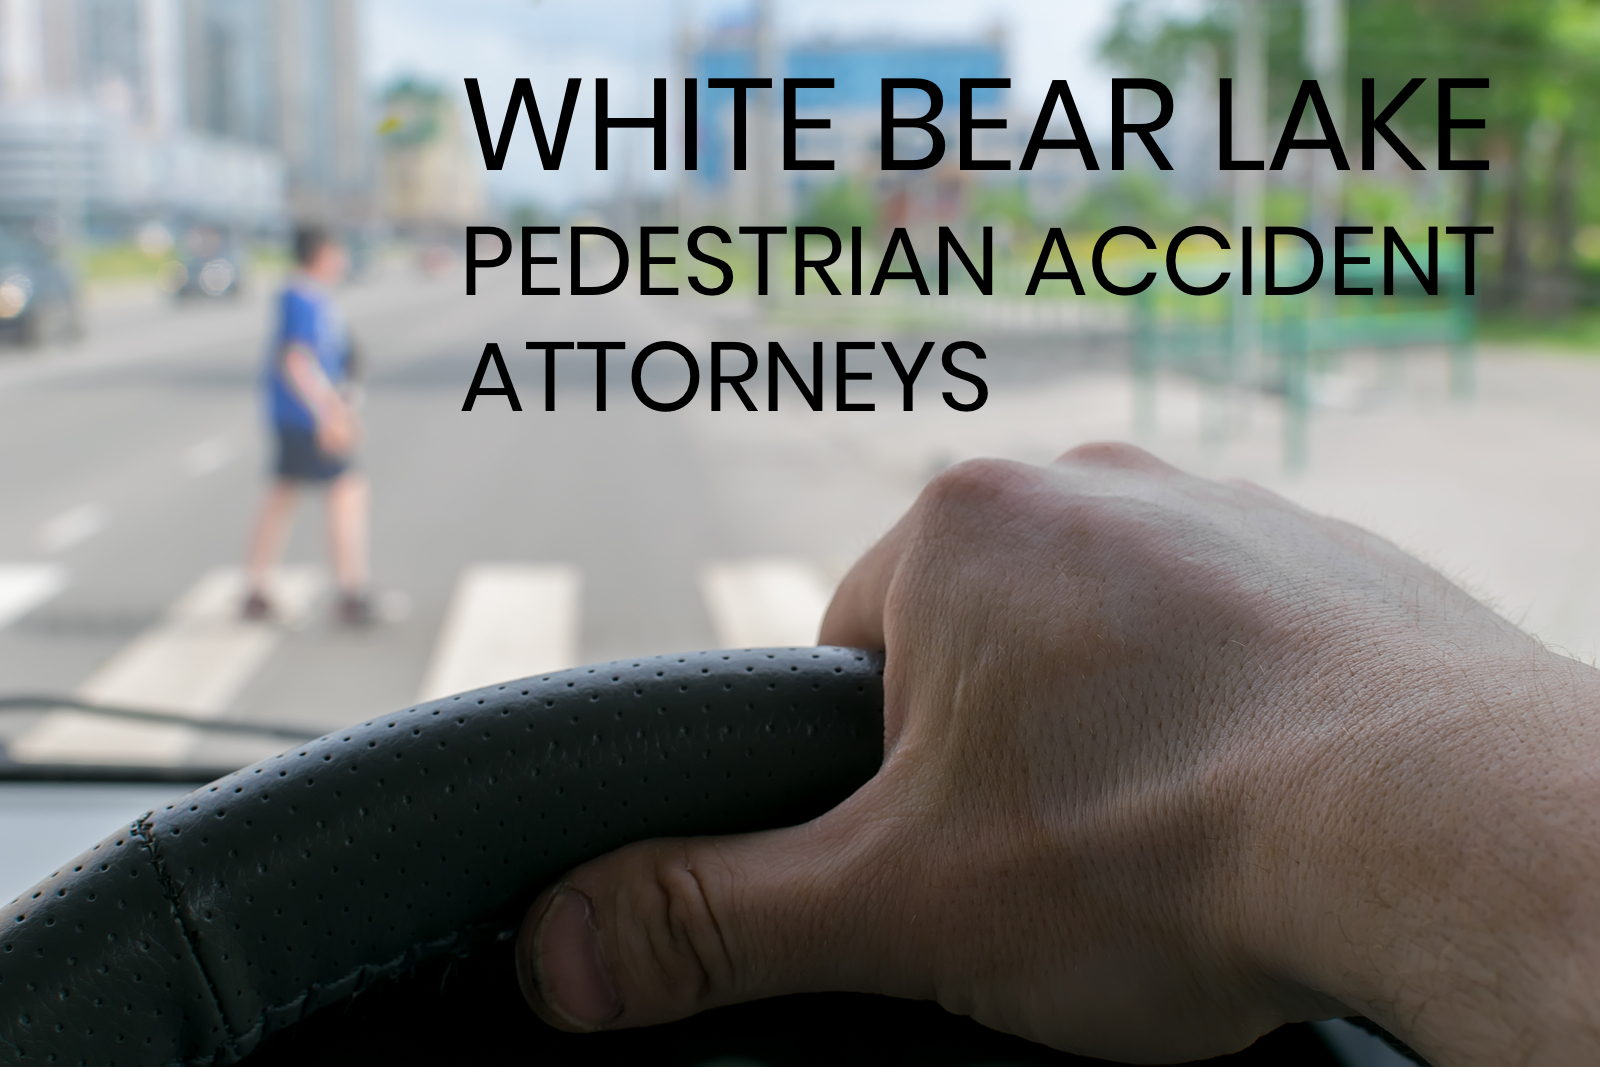 person hit while crossing road - white bear lake pedestrian accident attorneys - Minnesota - Sand Law LLC